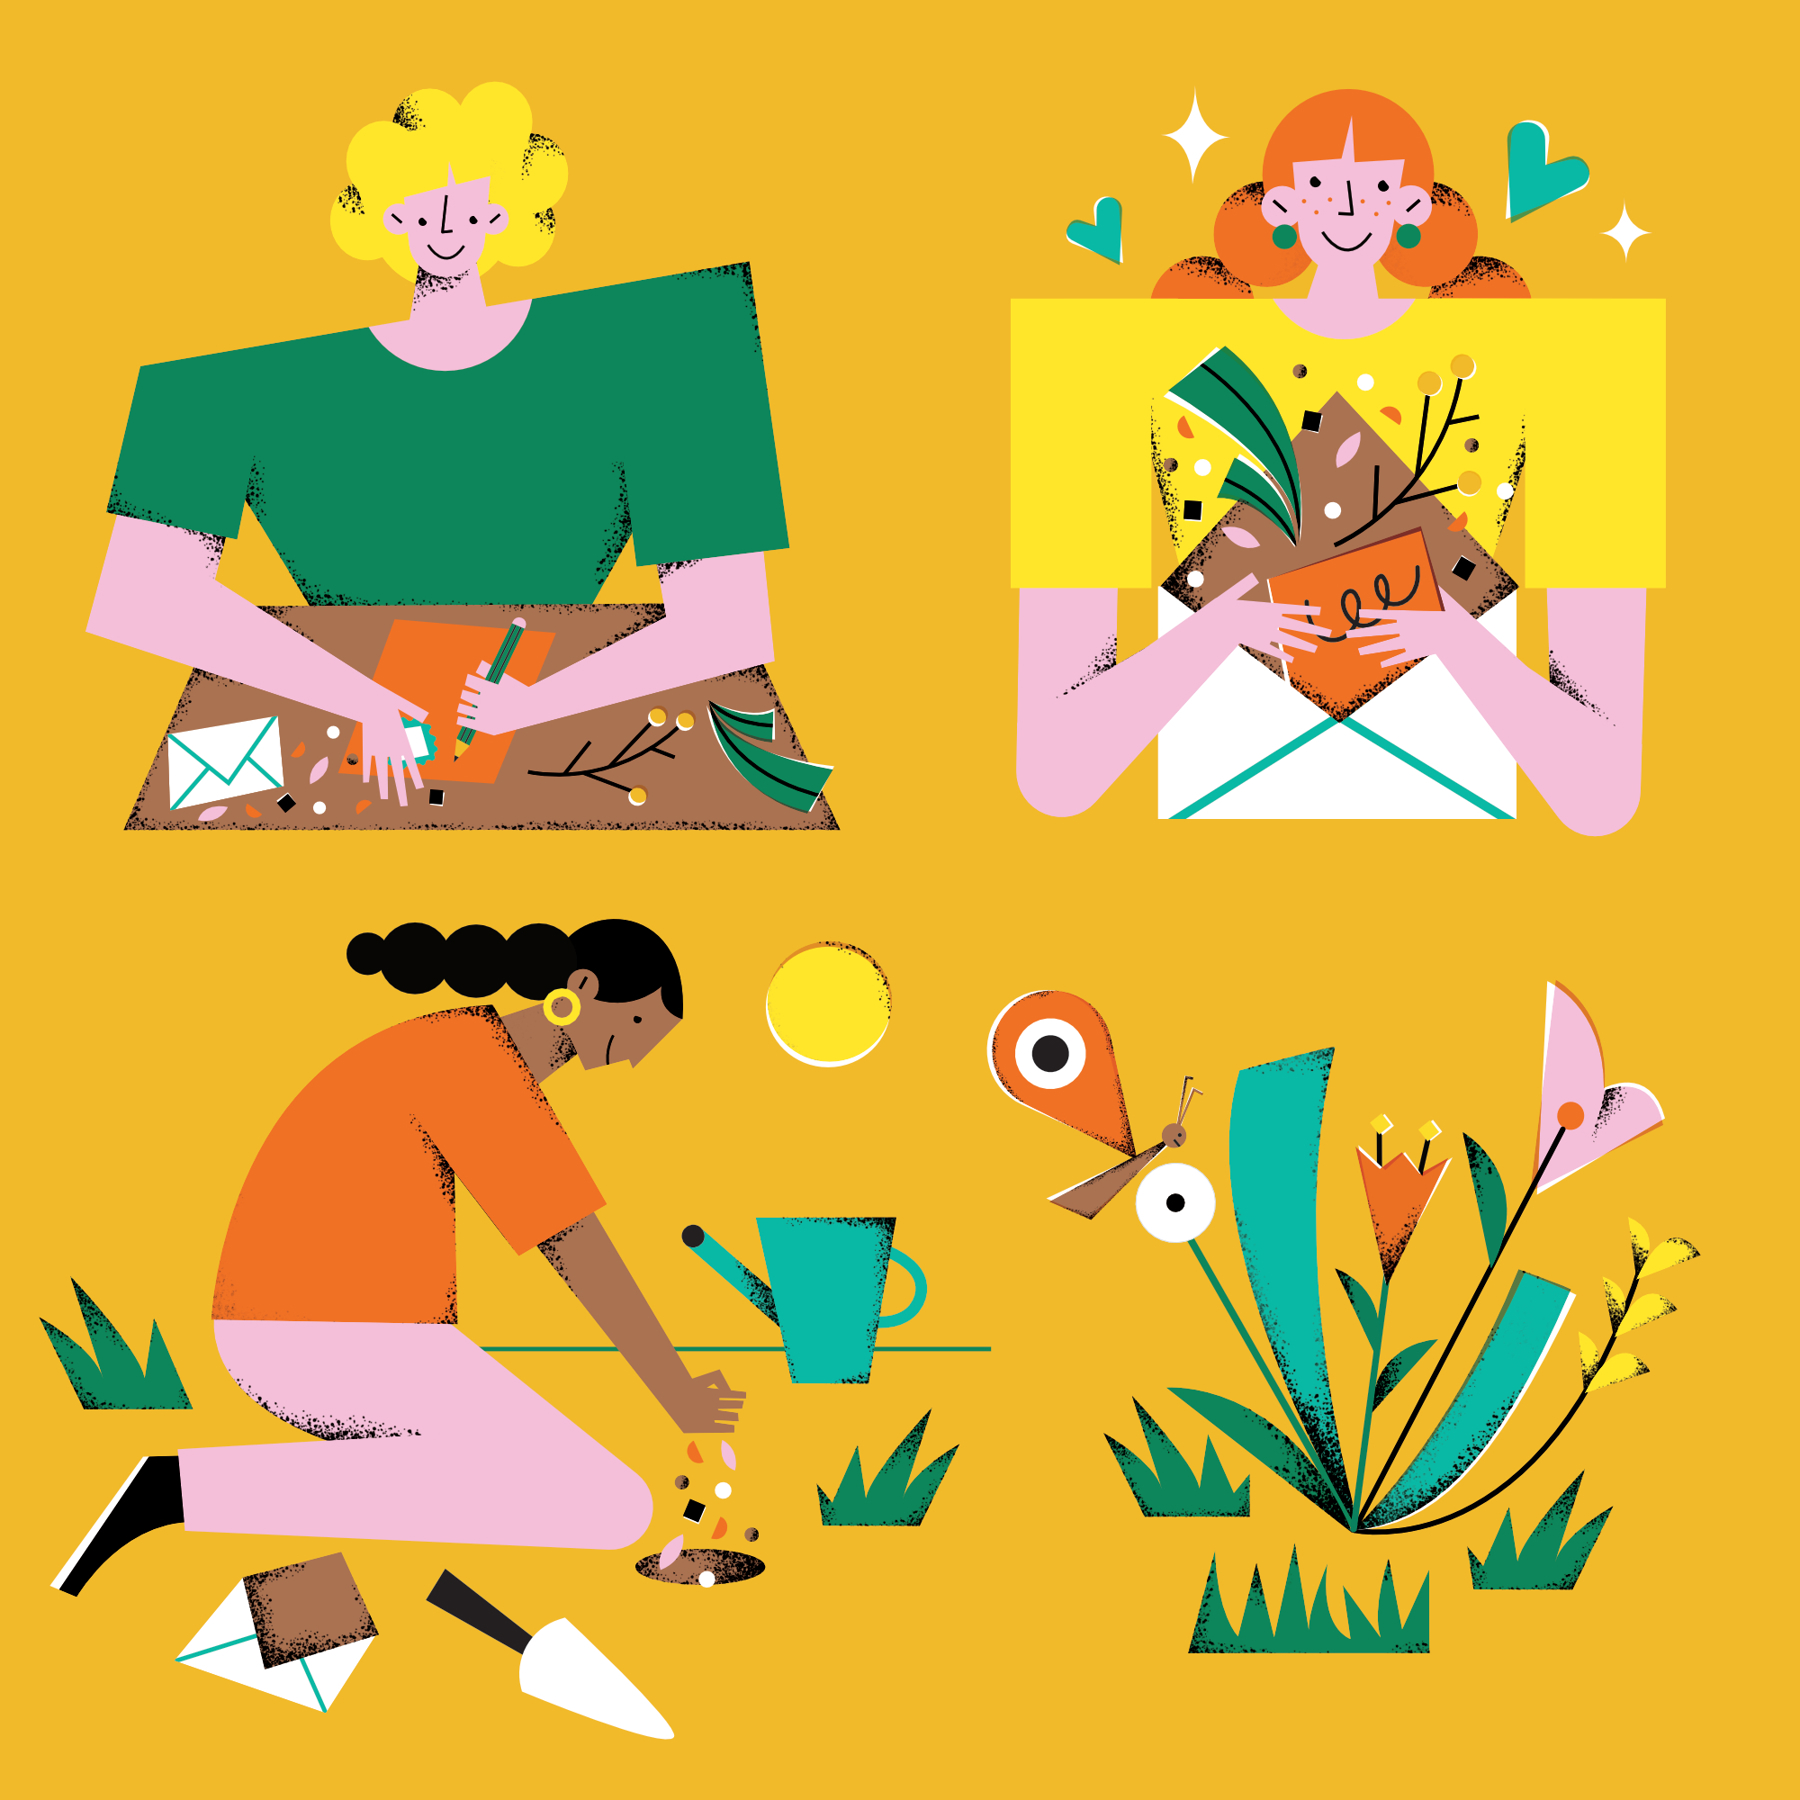 An illustration of people planting seeds and growing flowers and trees.